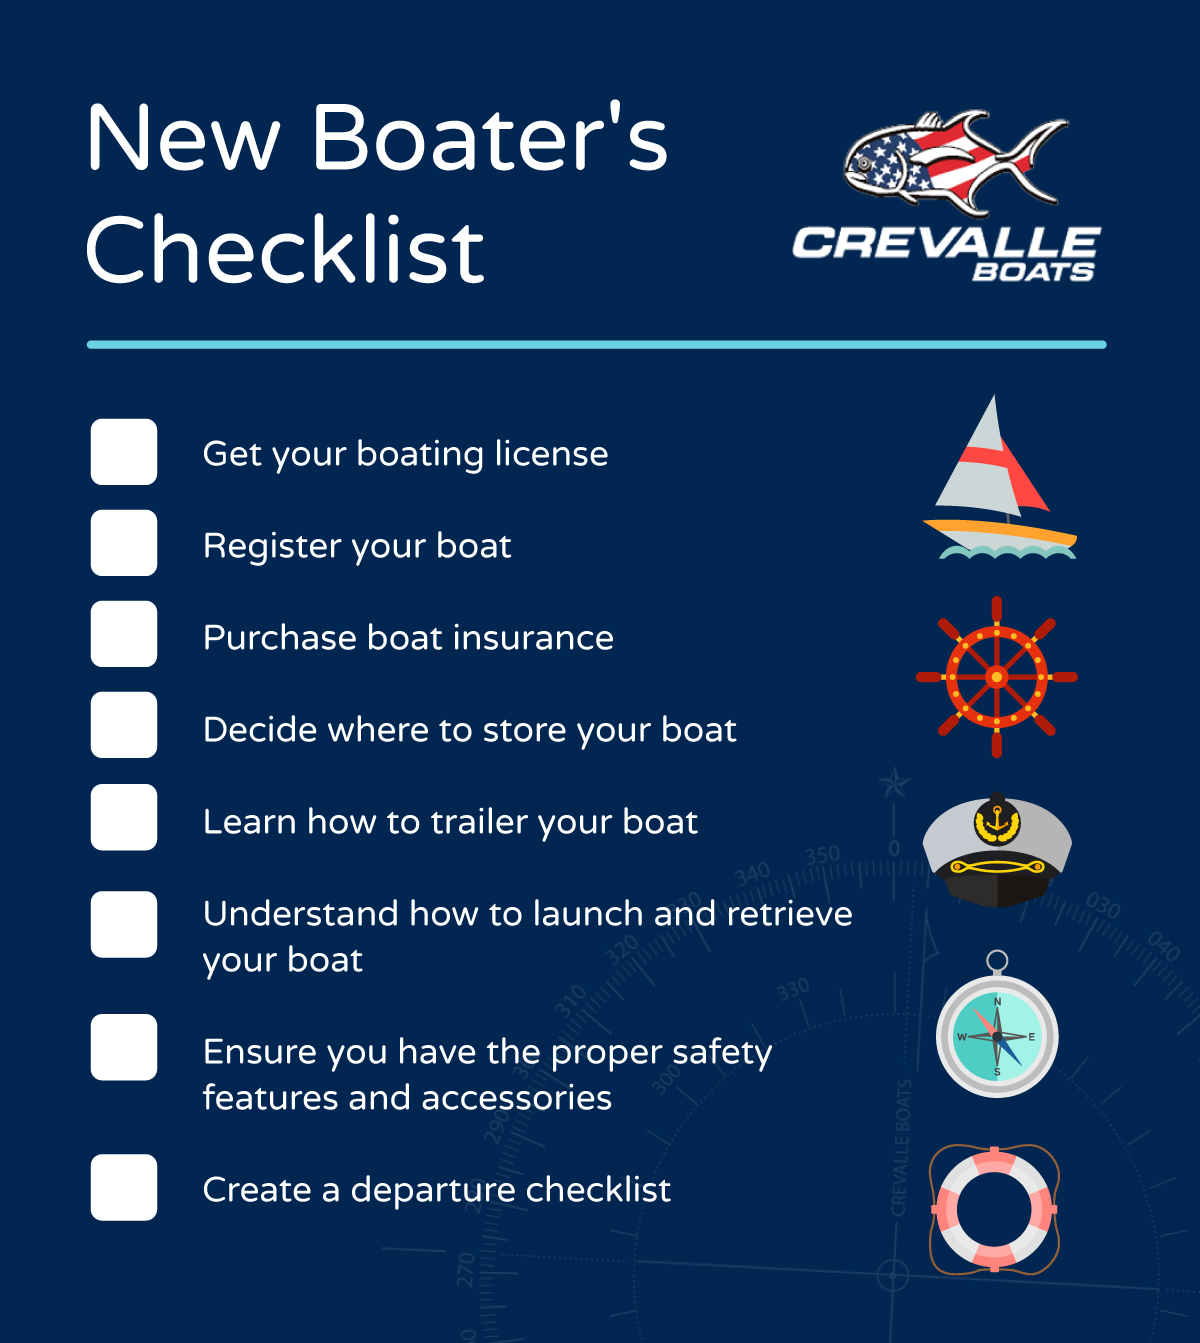 New Boater's Checklist 1. Get your boating license 2. Register your boat 3. Purchase boat insurance 4. Decide where to store your boat 5. learn how to trailer your boat 6. Understand how to launch and retrieve your boat 7. Ensure you have the proper safety features and accessories 9. Create a departure checklist